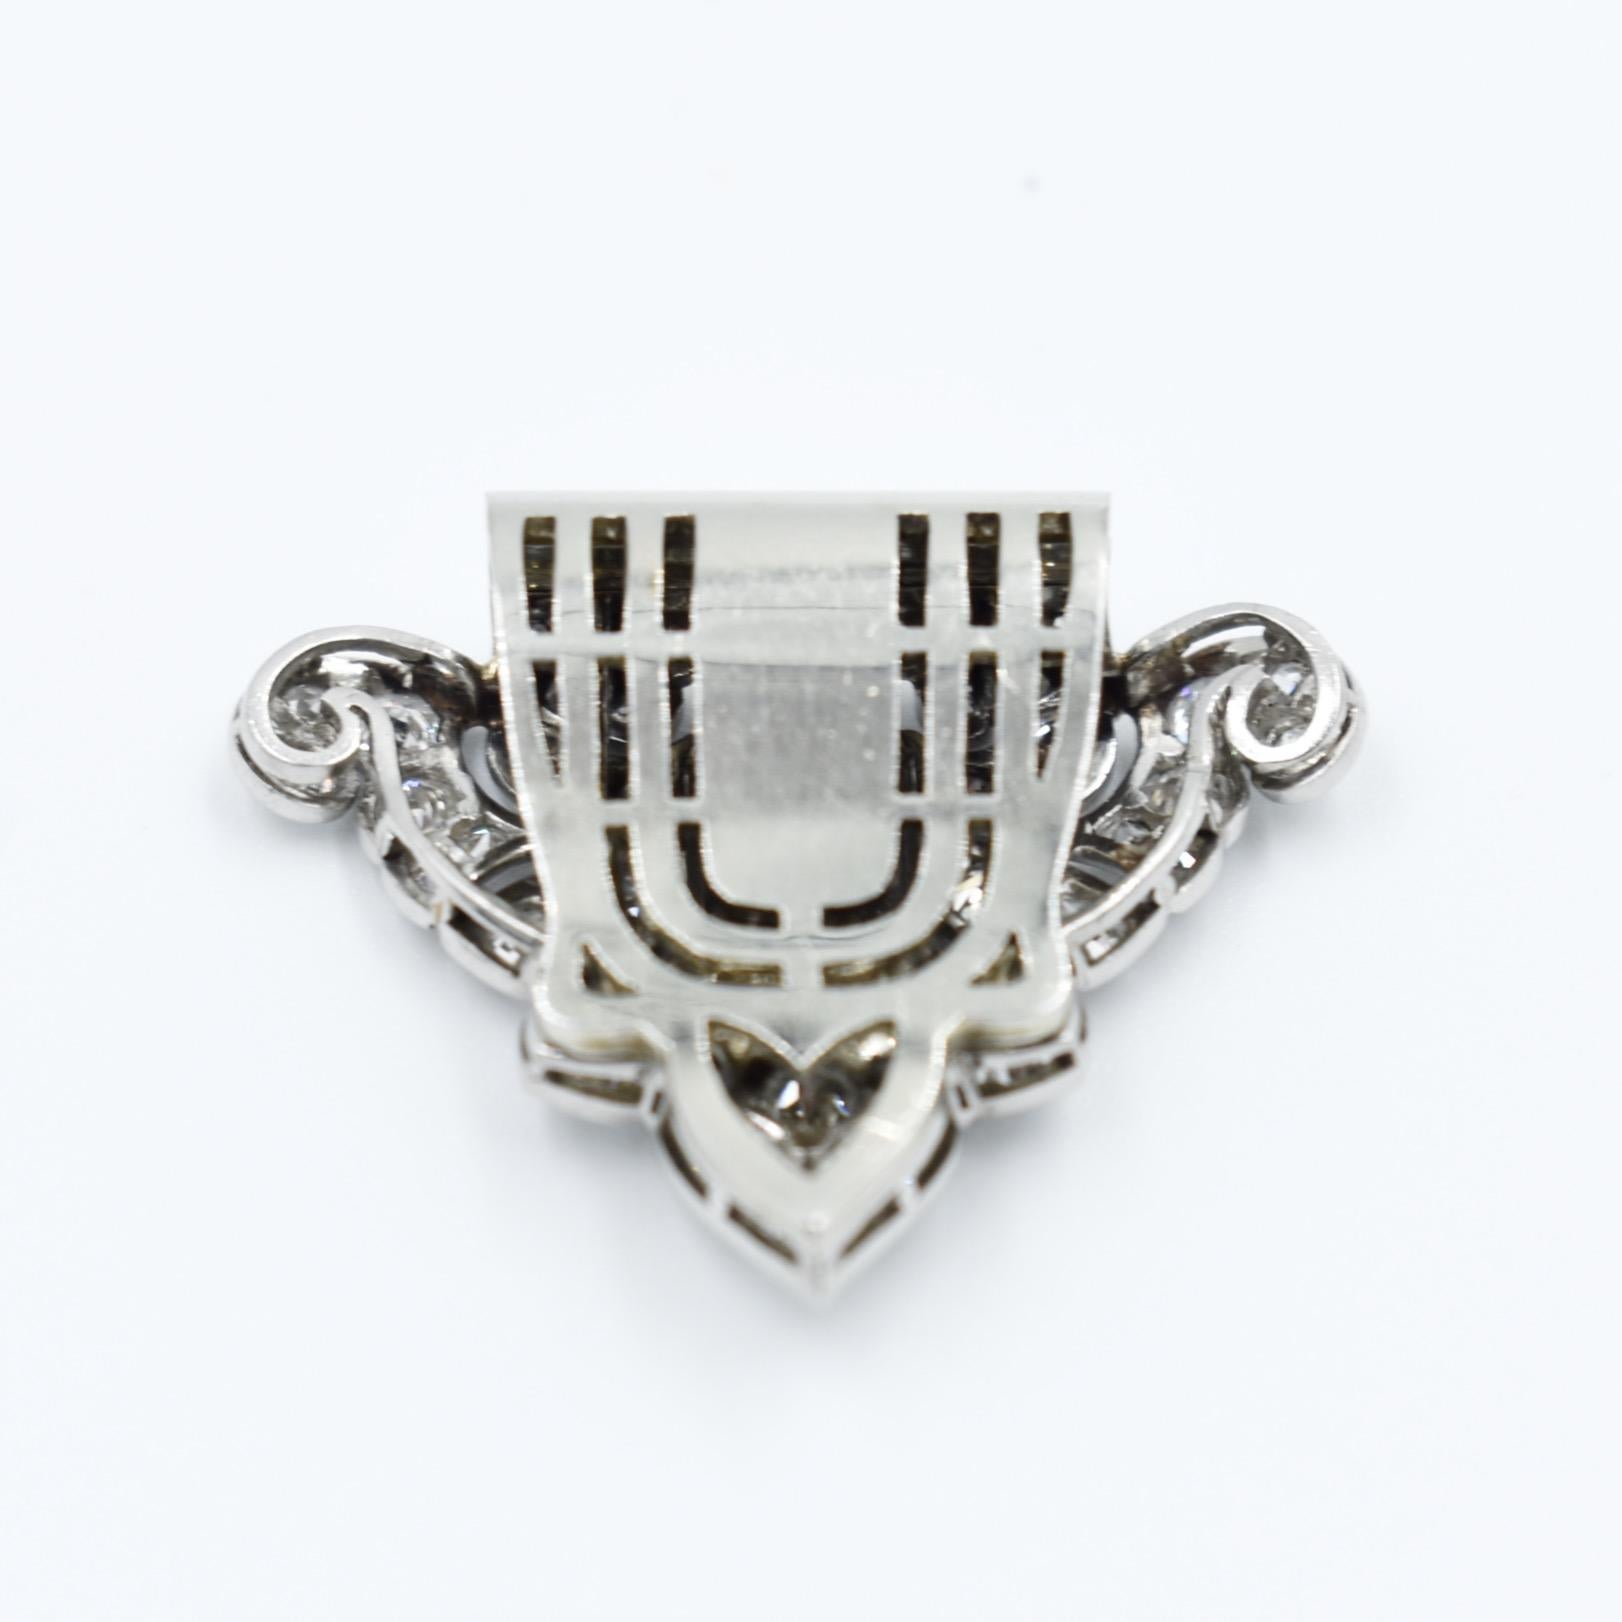 This is a stunning Art Deco clip from the 1920s, made of 18-carat gold and platinum, set with diamonds of various sizes, including baguette and half-cut diamonds, totaling approximately 3 carats. The clip features typical geometric designs of the